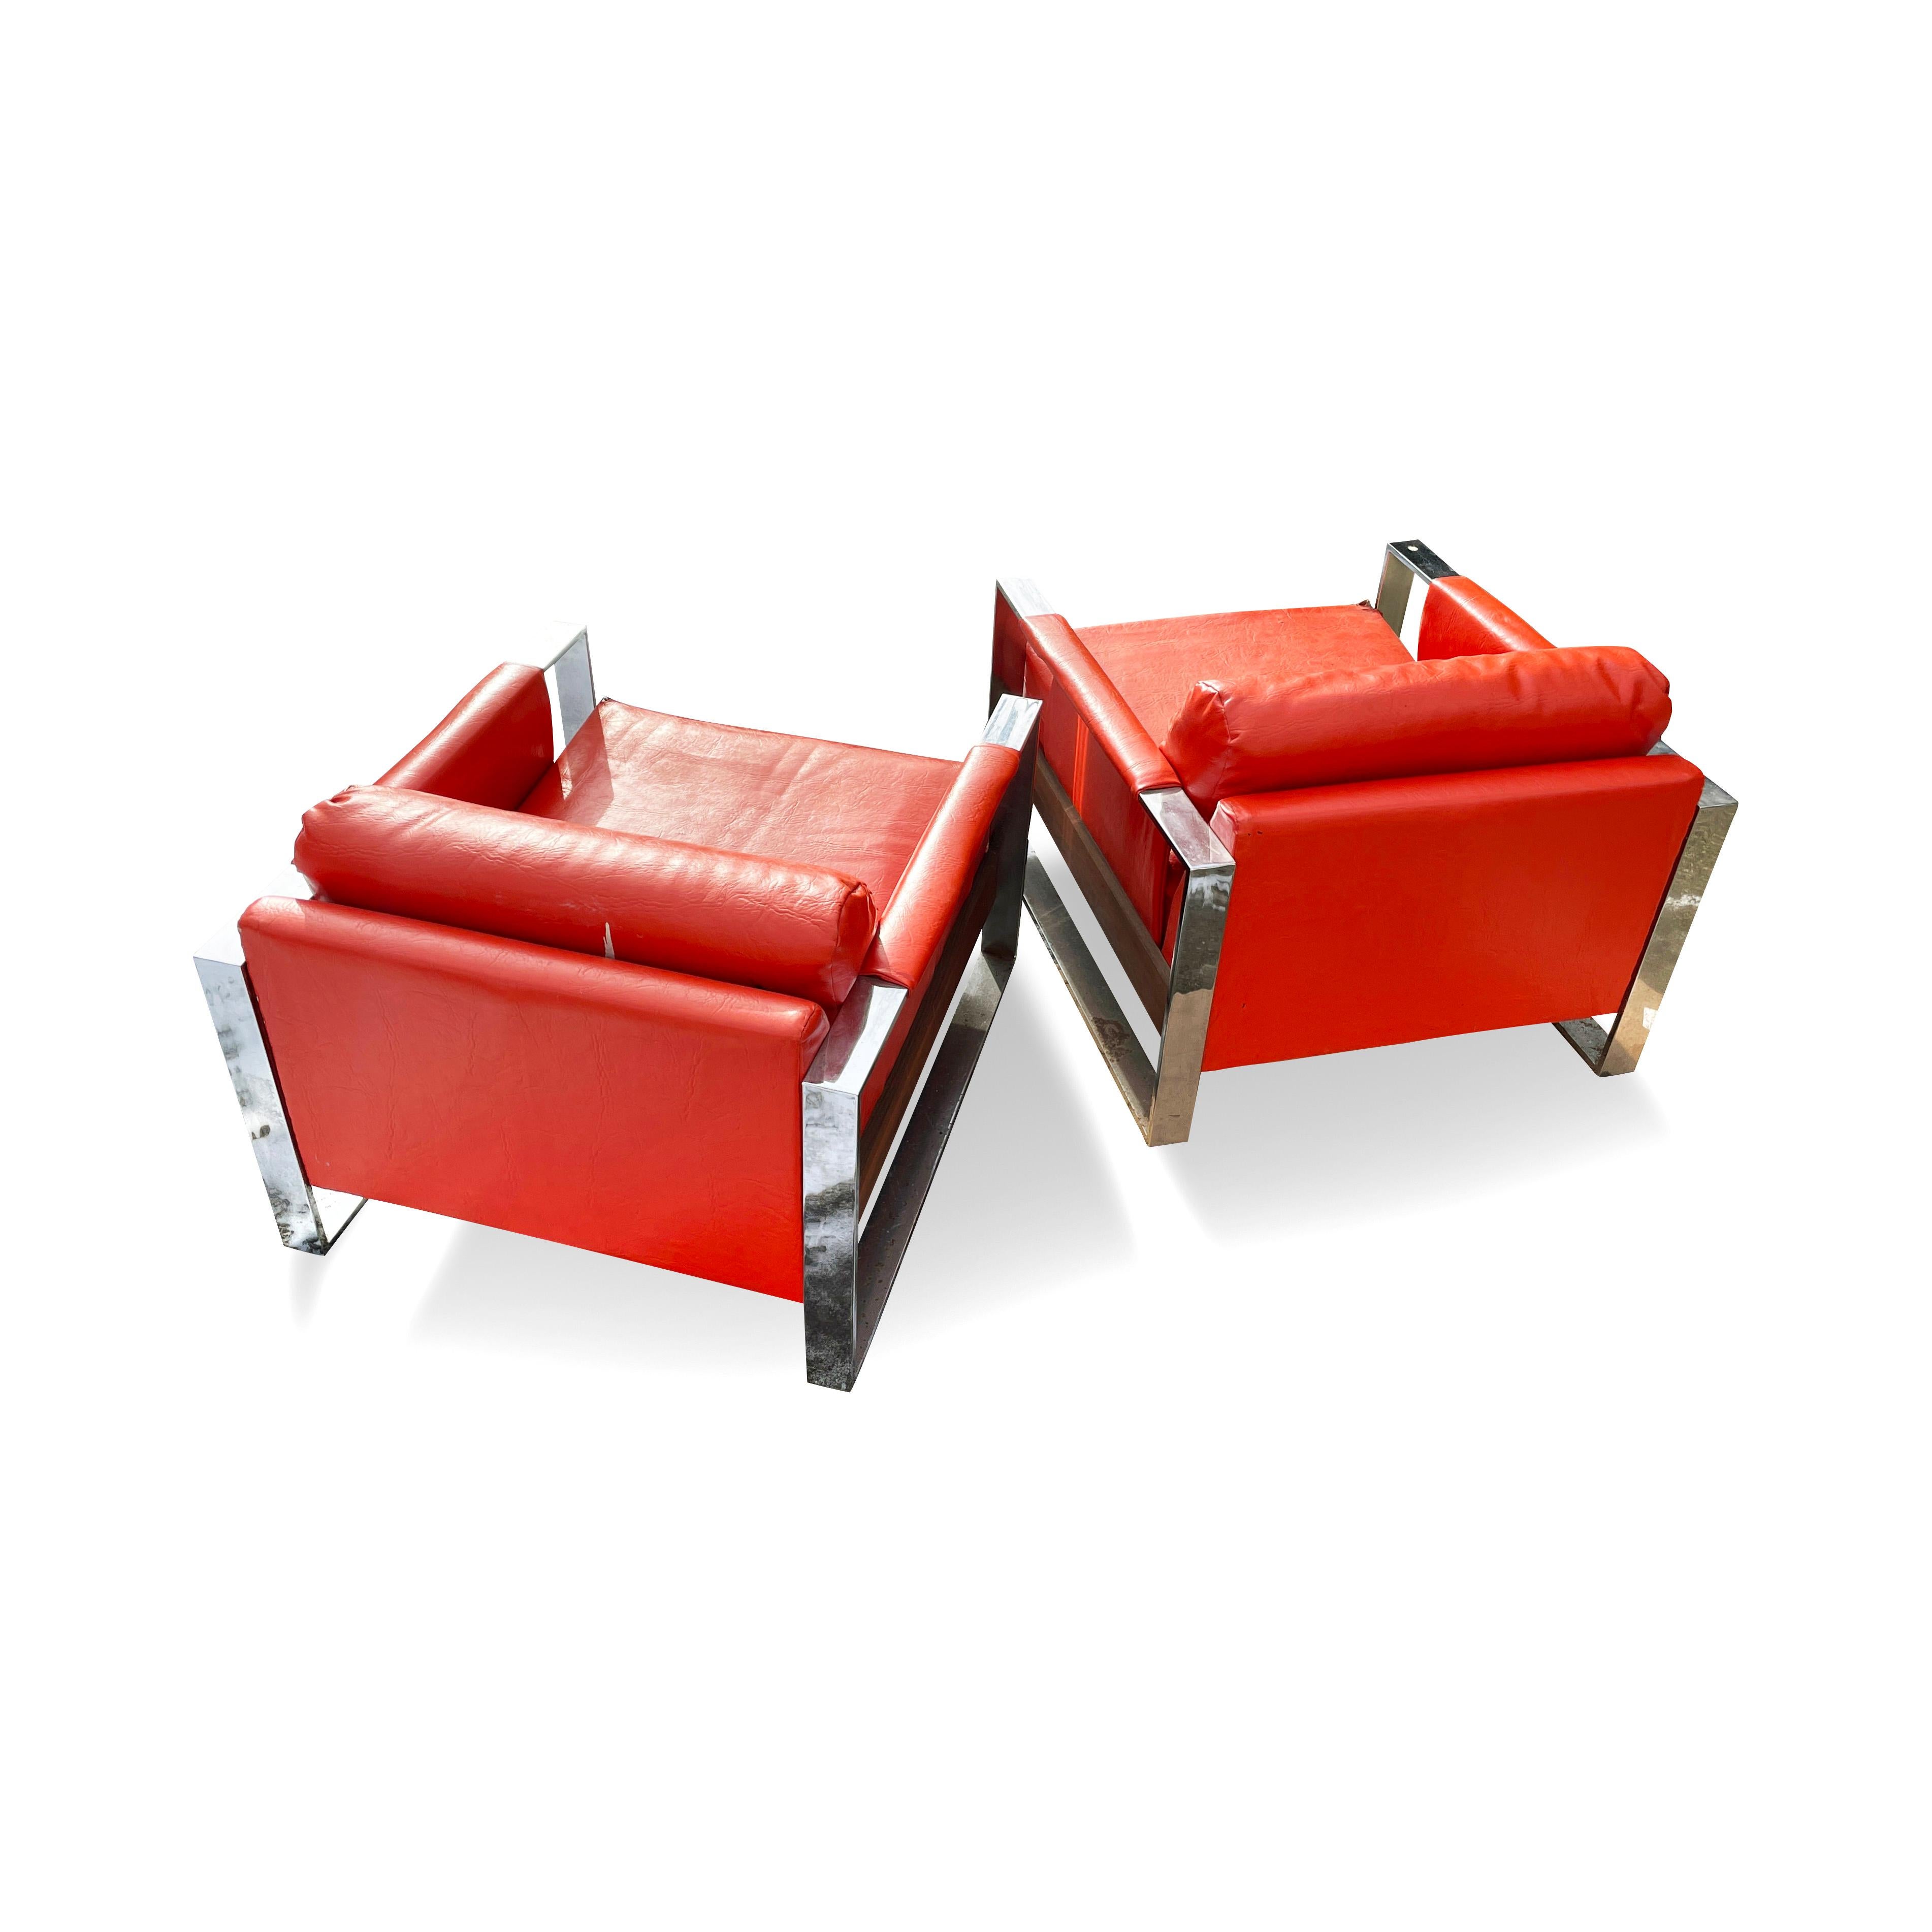 American Pair of Chrome Lounge Chairs by Adrian Pearsall for Craft Associates